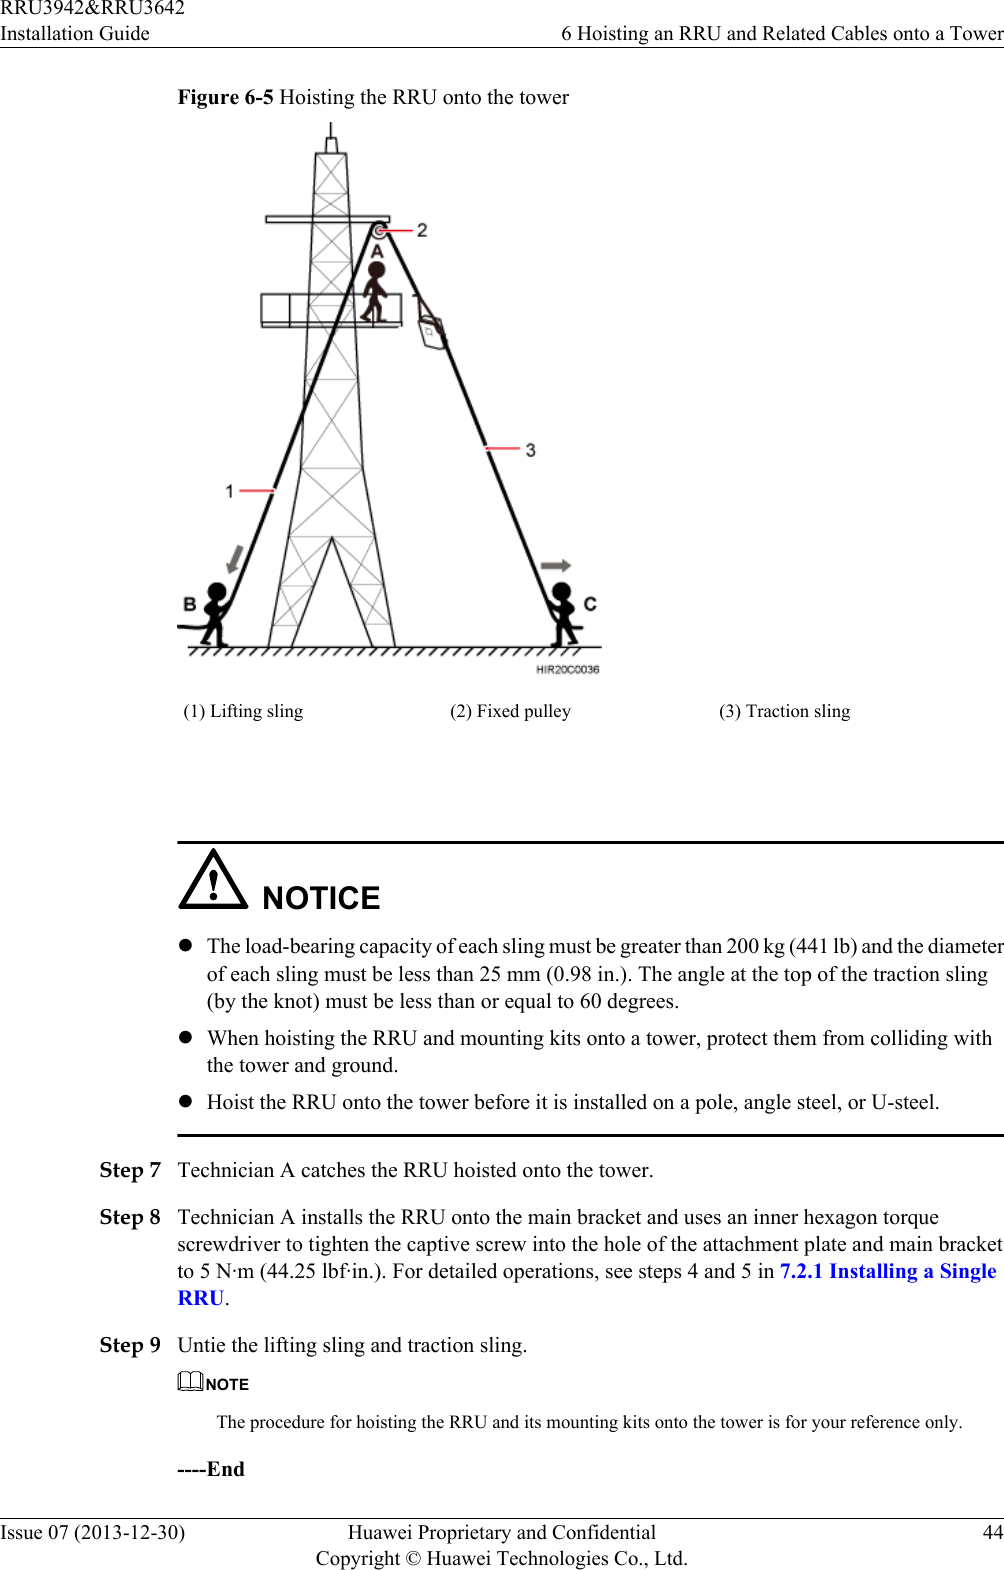 Figure 6-5 Hoisting the RRU onto the tower(1) Lifting sling (2) Fixed pulley (3) Traction sling NOTICElThe load-bearing capacity of each sling must be greater than 200 kg (441 lb) and the diameterof each sling must be less than 25 mm (0.98 in.). The angle at the top of the traction sling(by the knot) must be less than or equal to 60 degrees.lWhen hoisting the RRU and mounting kits onto a tower, protect them from colliding withthe tower and ground.lHoist the RRU onto the tower before it is installed on a pole, angle steel, or U-steel.Step 7 Technician A catches the RRU hoisted onto the tower.Step 8 Technician A installs the RRU onto the main bracket and uses an inner hexagon torquescrewdriver to tighten the captive screw into the hole of the attachment plate and main bracketto 5 N·m (44.25 lbf·in.). For detailed operations, see steps 4 and 5 in 7.2.1 Installing a SingleRRU.Step 9 Untie the lifting sling and traction sling.NOTEThe procedure for hoisting the RRU and its mounting kits onto the tower is for your reference only.----EndRRU3942&amp;RRU3642Installation Guide 6 Hoisting an RRU and Related Cables onto a TowerIssue 07 (2013-12-30) Huawei Proprietary and ConfidentialCopyright © Huawei Technologies Co., Ltd.44